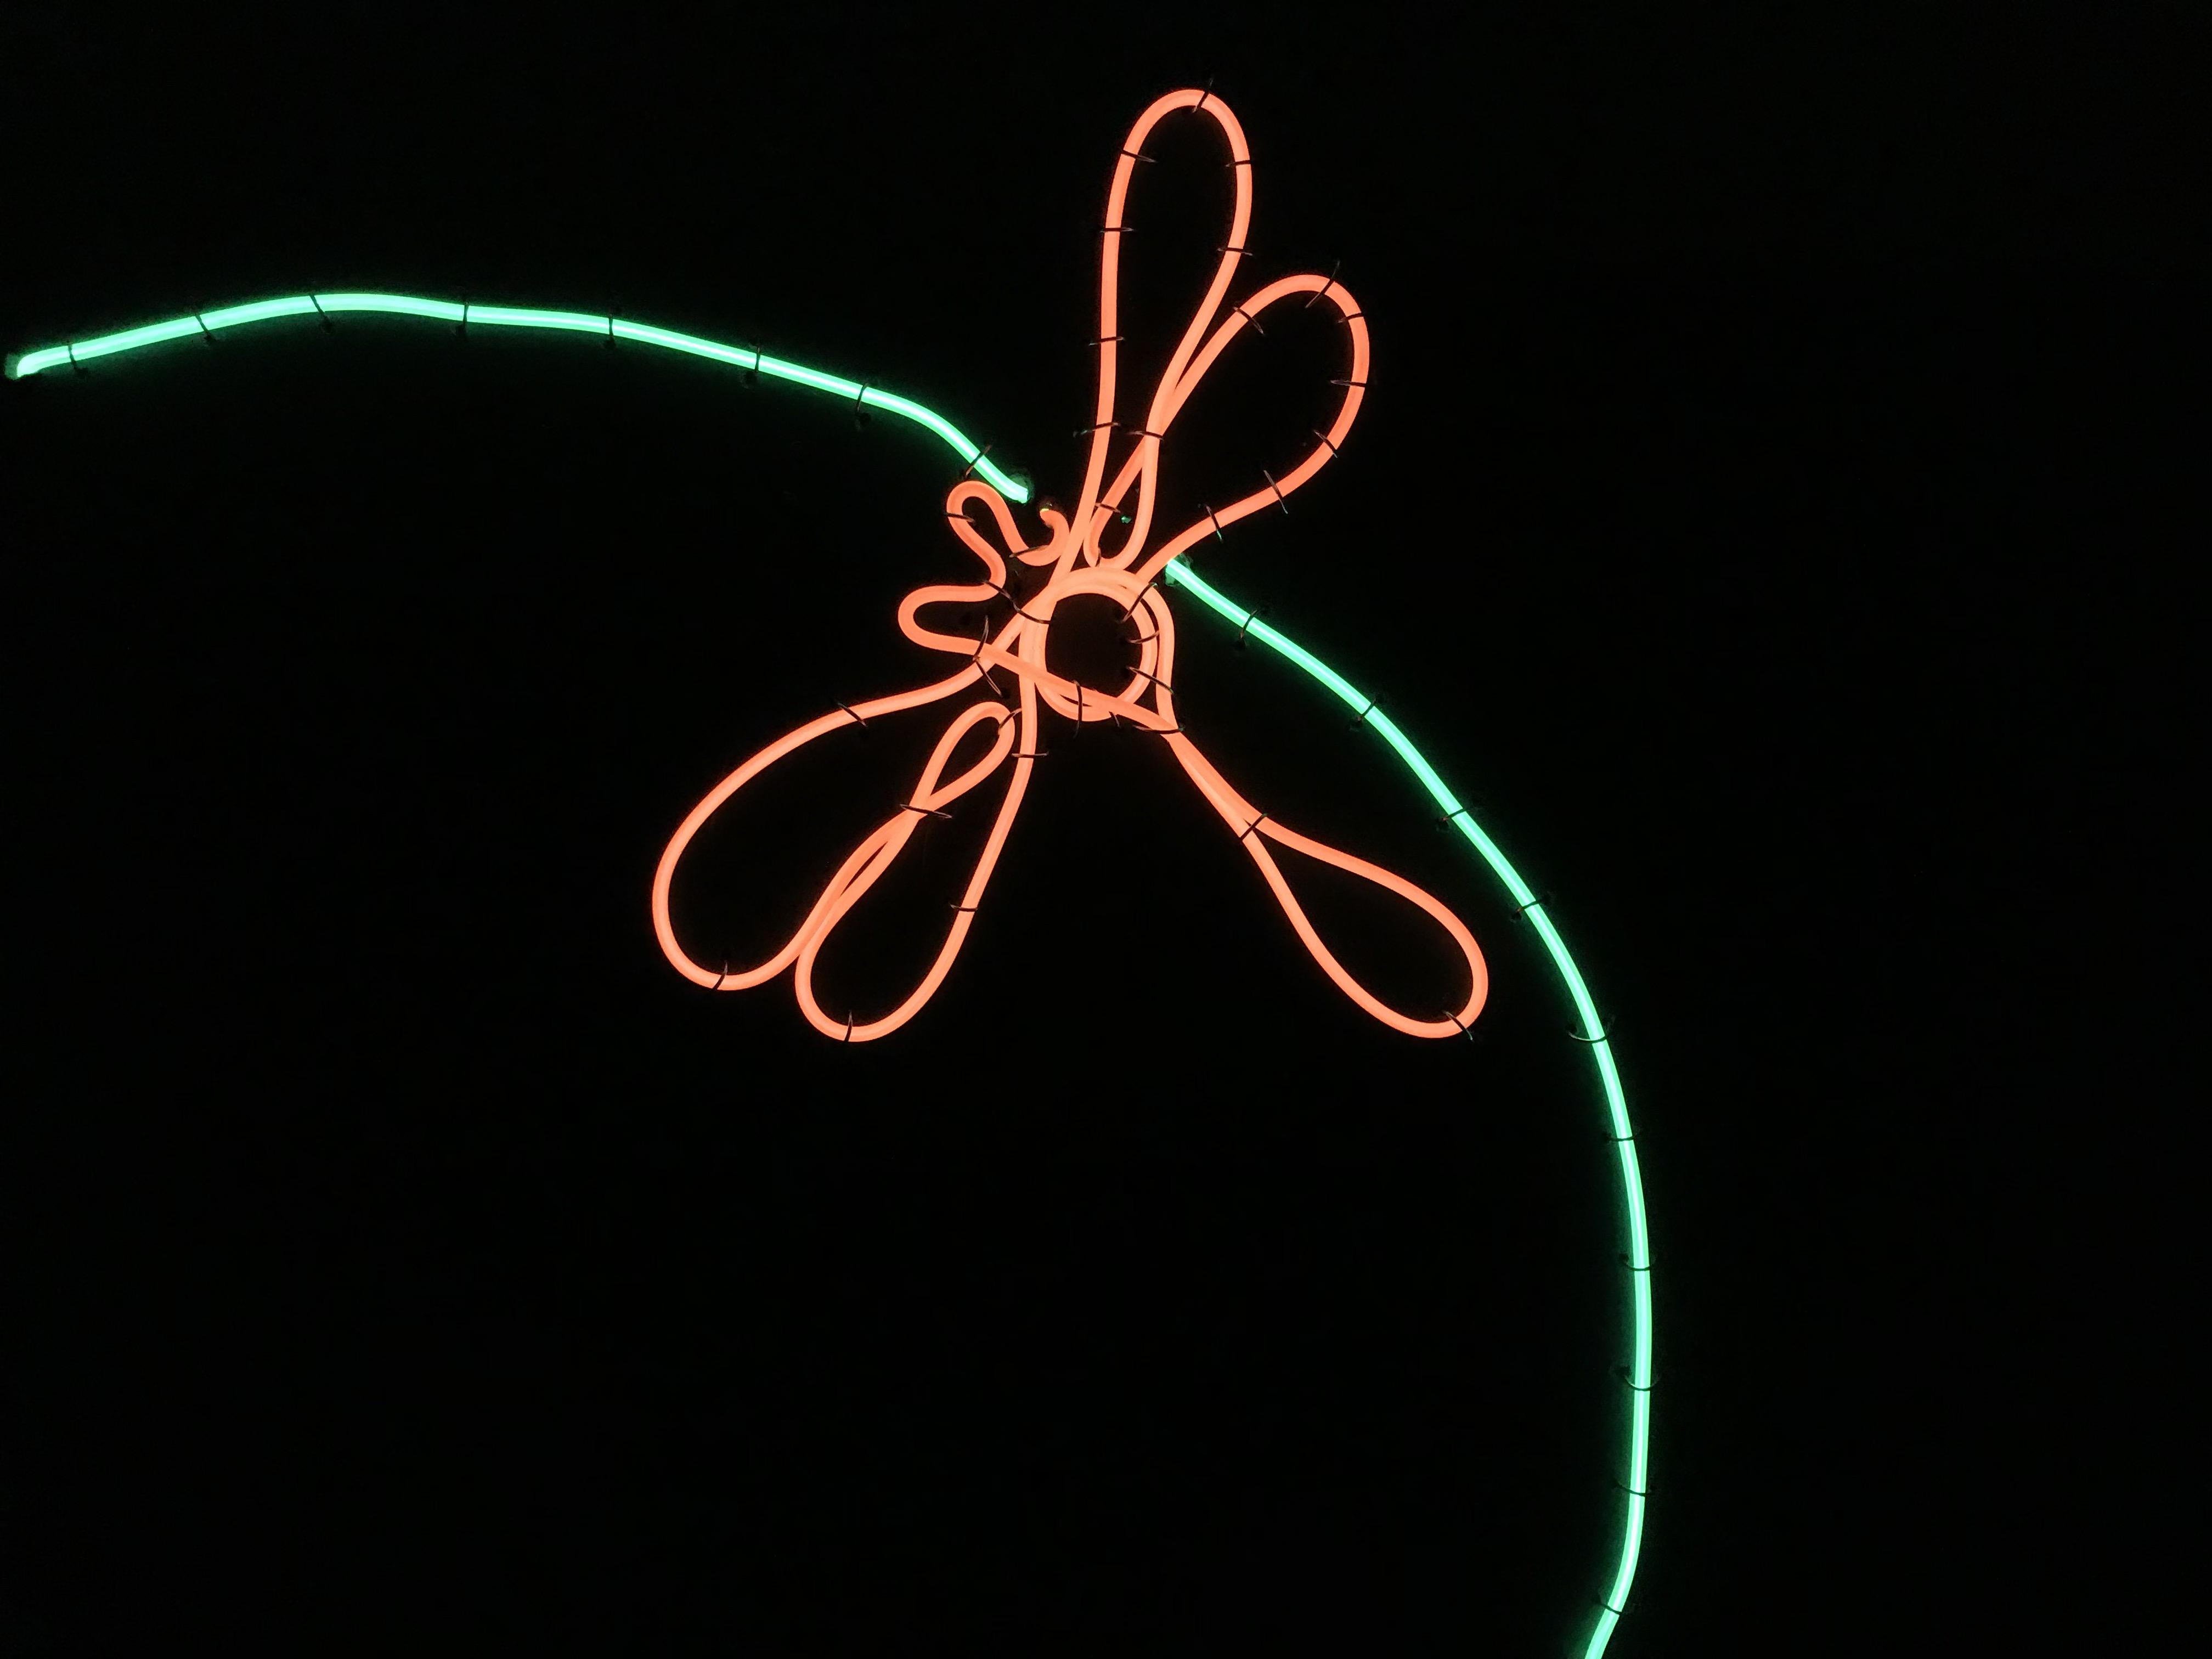 Make your own Neon LED Art